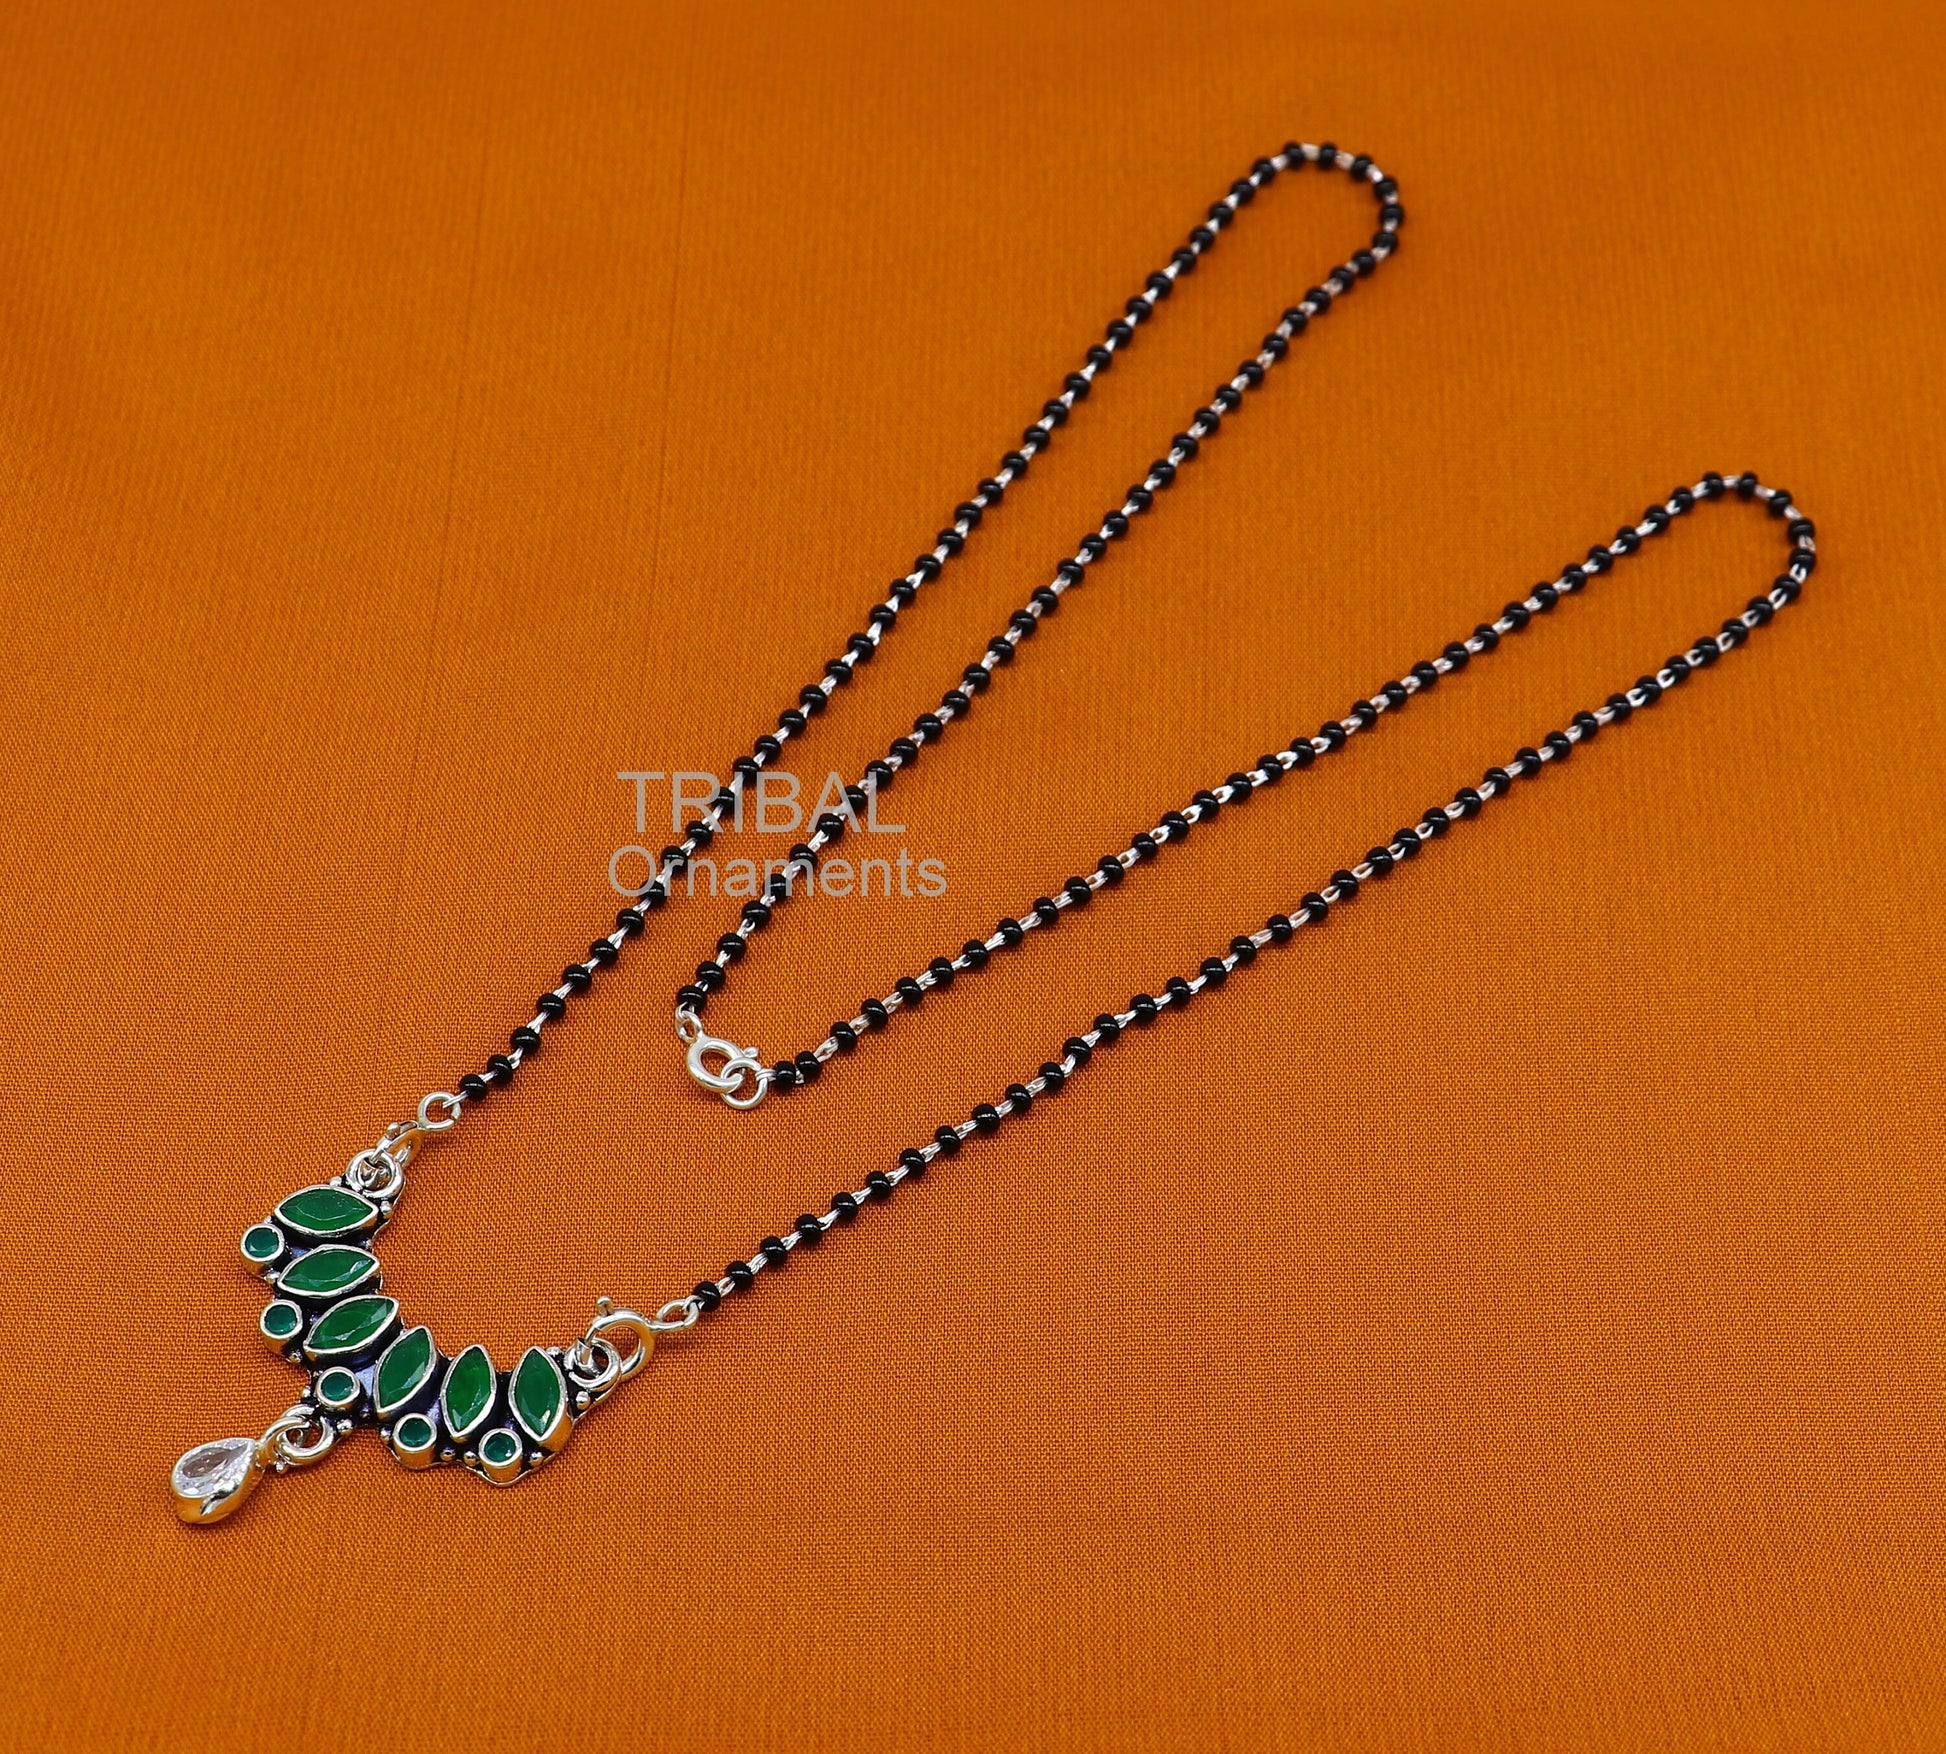 925 sterling silver black beads mangal sutra chain necklace for daily use brides Mangalsutra chunky necklace green cut stone pendant ms26 - TRIBAL ORNAMENTS